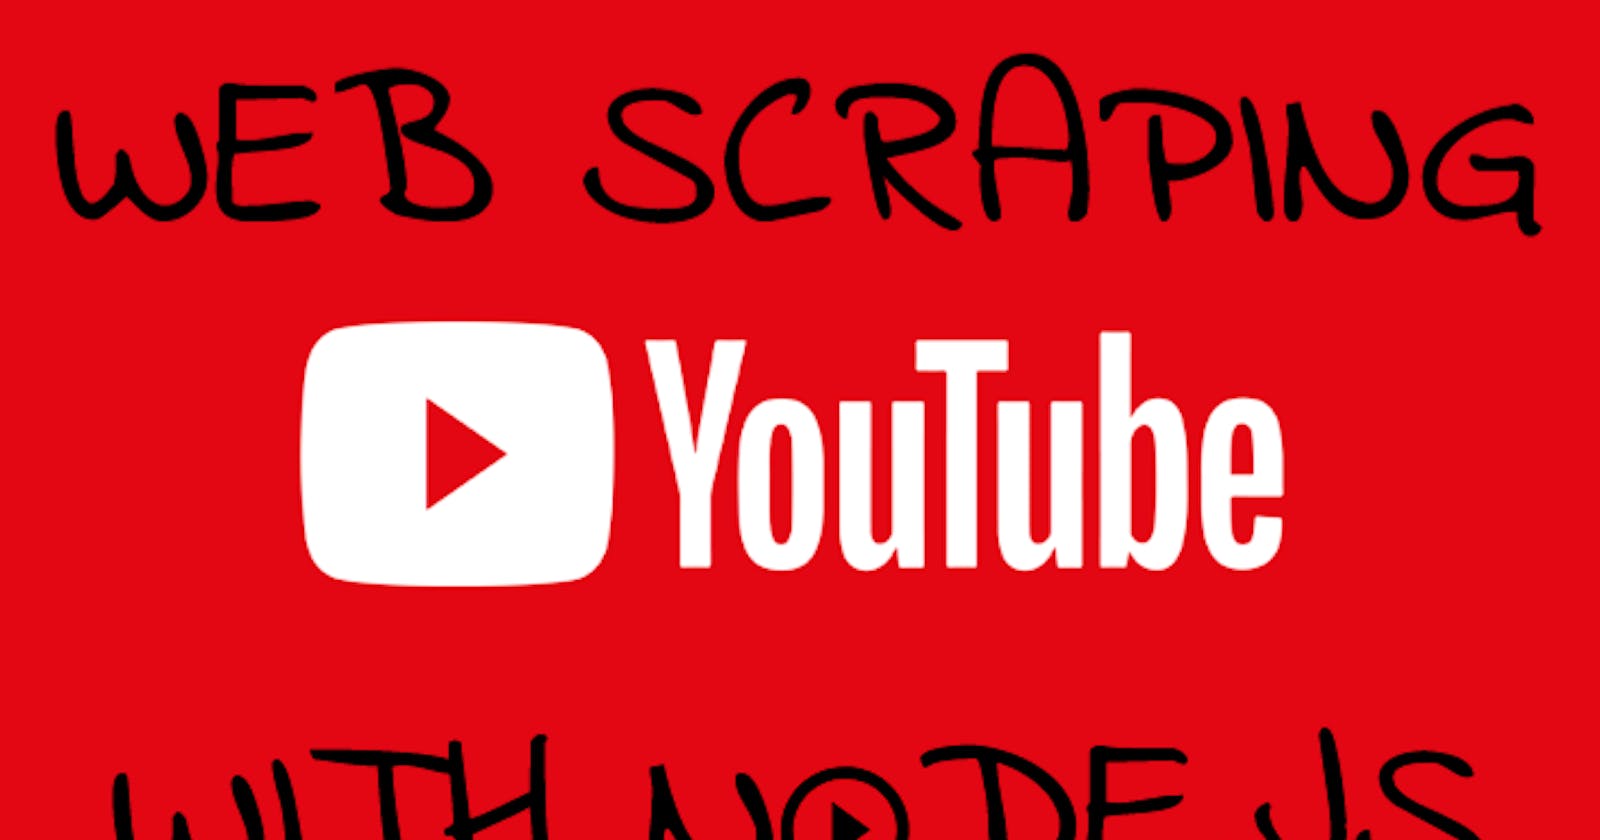 Web scraping YouTube autocomplete with Nodejs